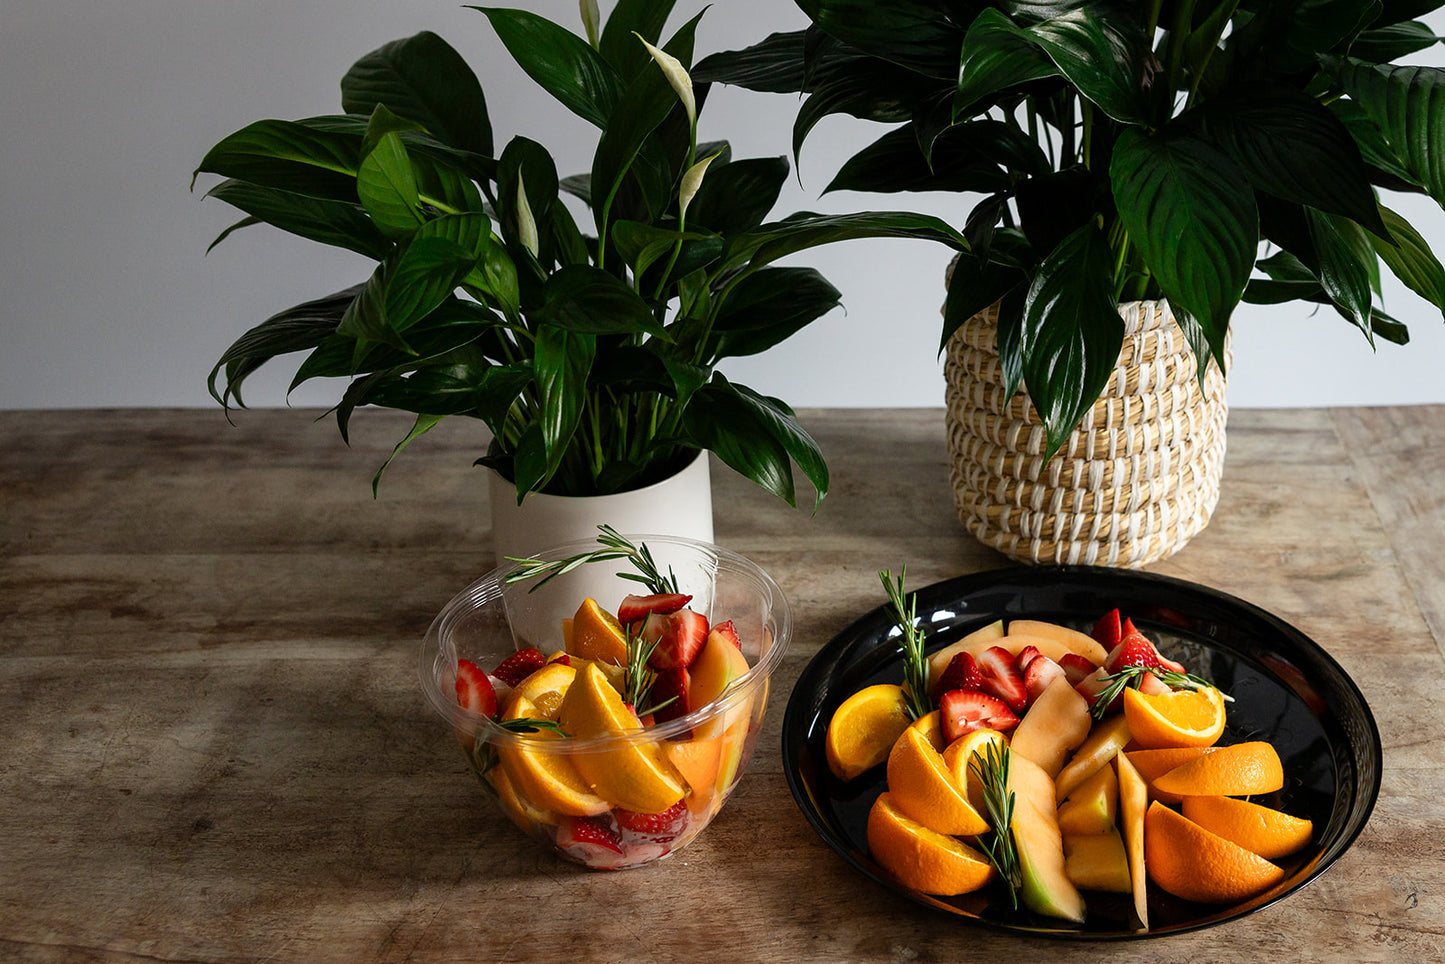 Fruit platter with fresh seasonal fruits and peace lilies